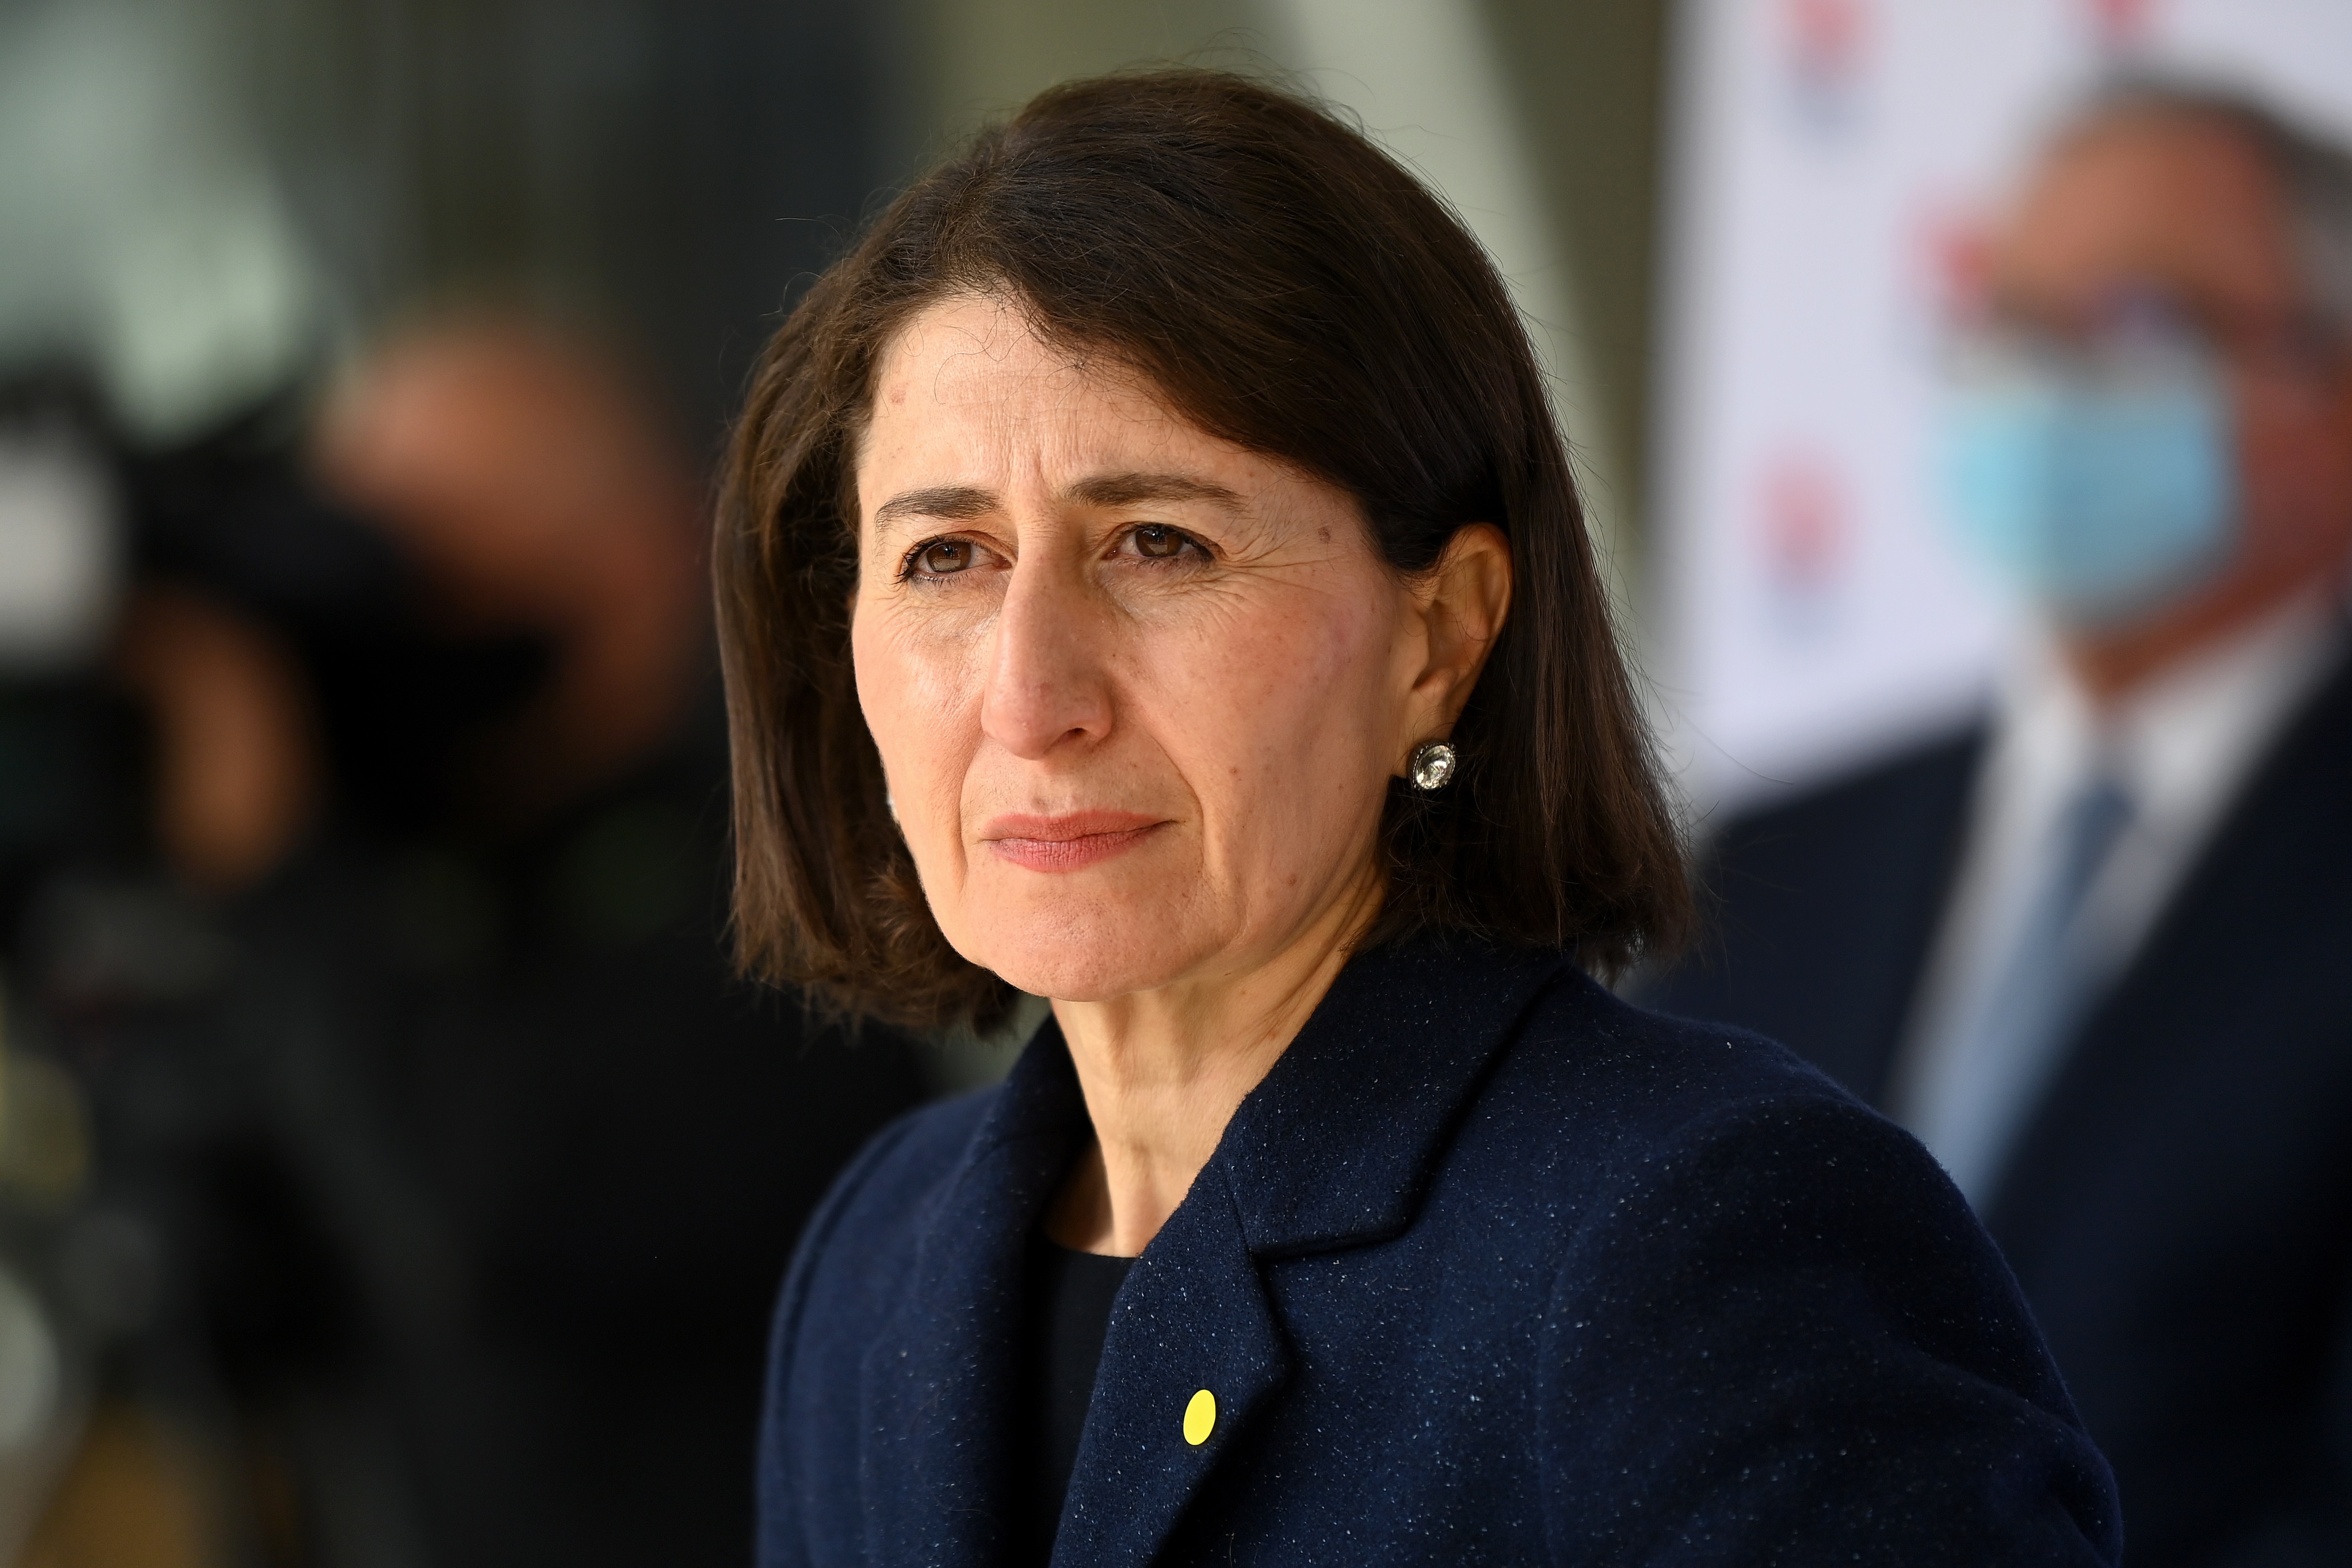 NSW Premier Gladys Berejiklian speaks to the media during a COVID-19 press conference in Sydney, Thursday, July 8, 2021. NSW has recorded 38 new locally acquired COVID-19 cases overnight. (AAP Image/Bianca De Marchi) NO ARCHIVING